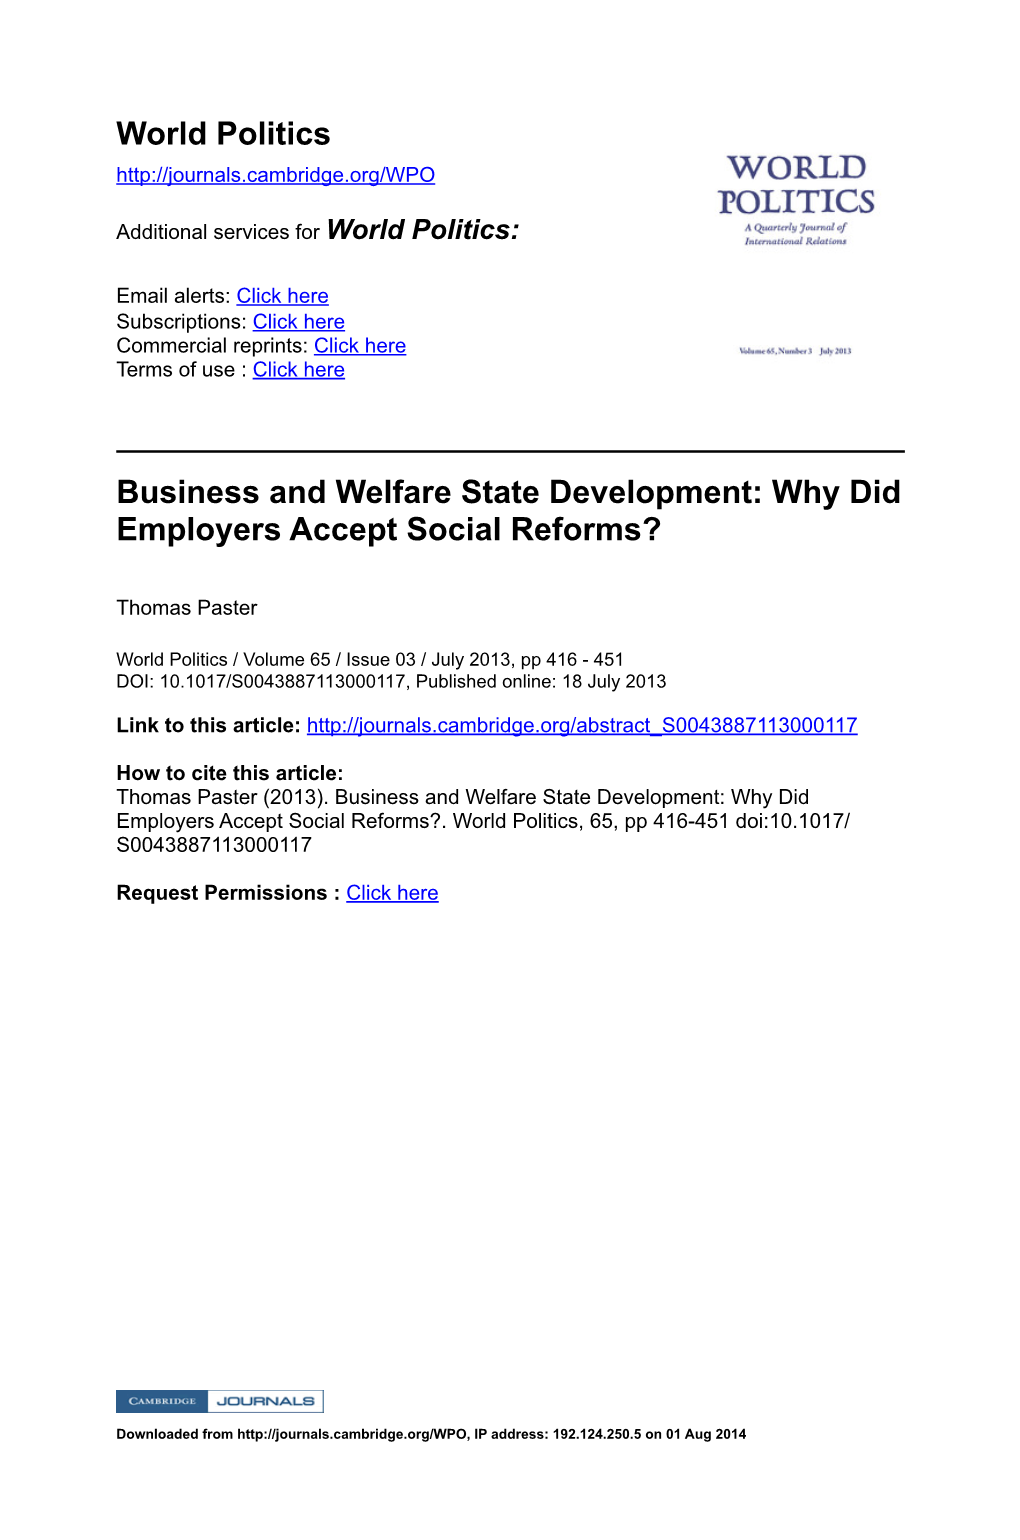 World Politics Business and Welfare State Development: Why Did Employers Accept Social Reforms?